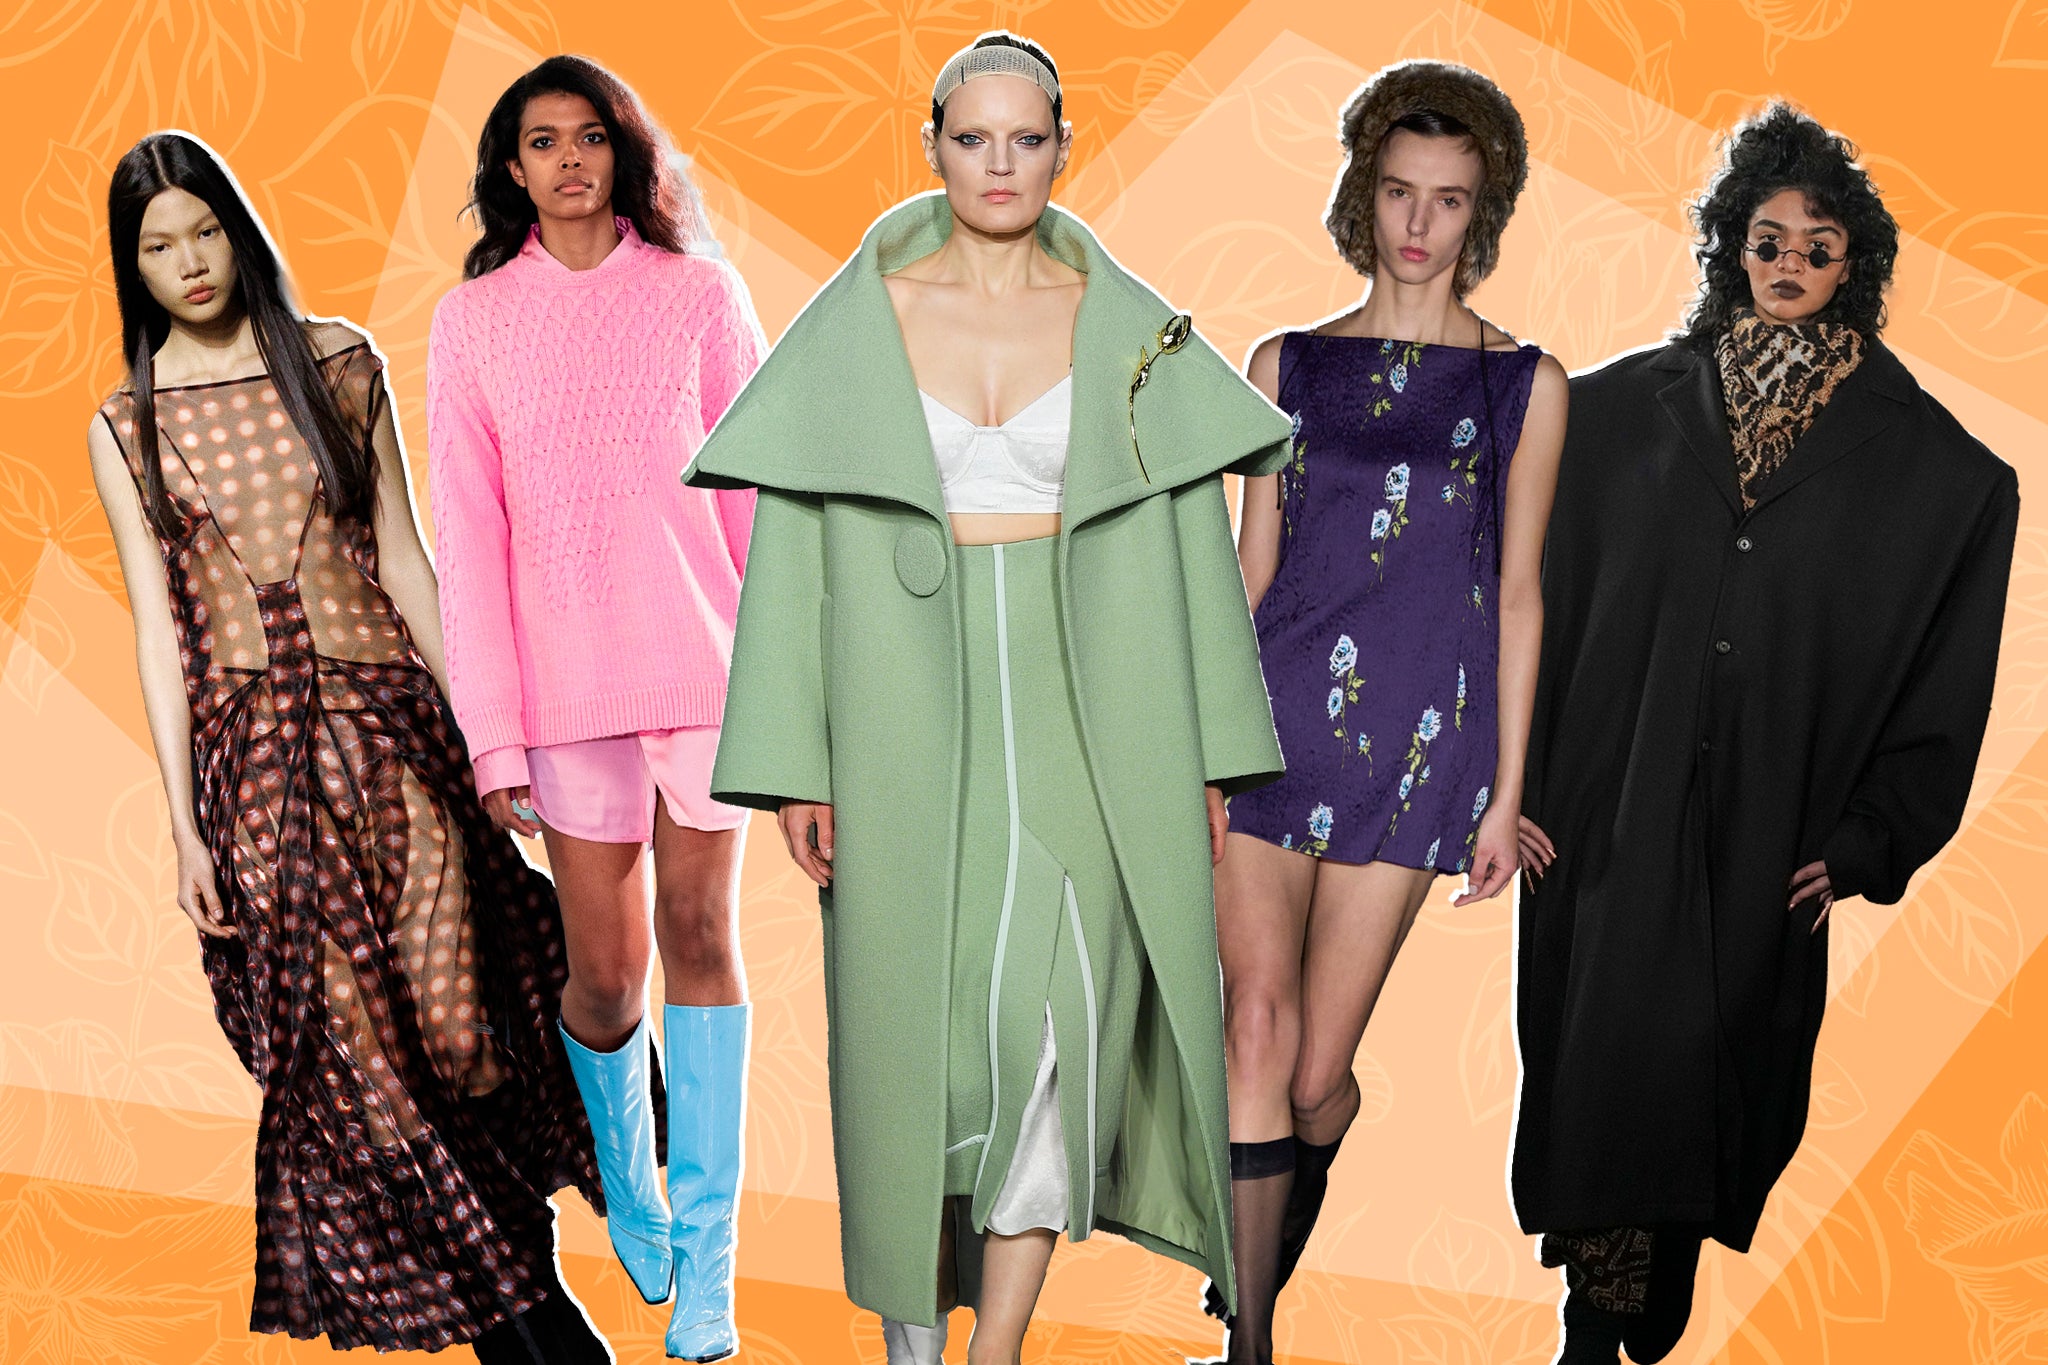 Playful pins, big coats and new vibe sheer were all seen on the runway